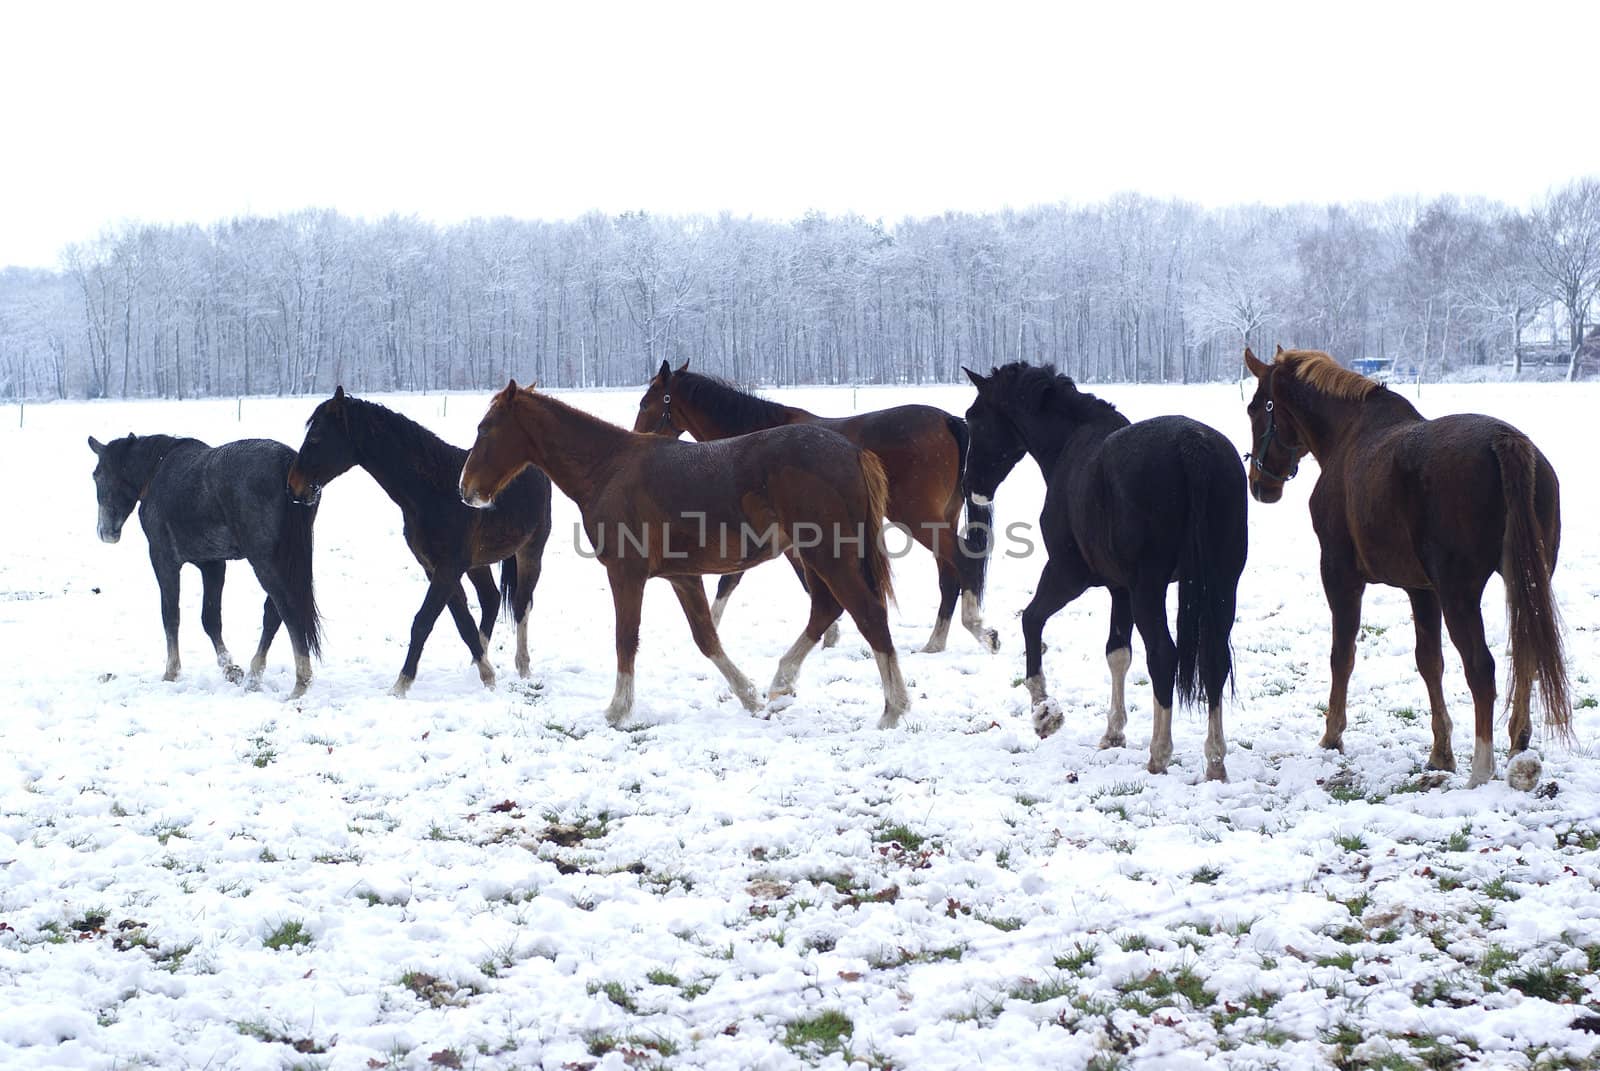 Small herd of horses in a snowy meadow.